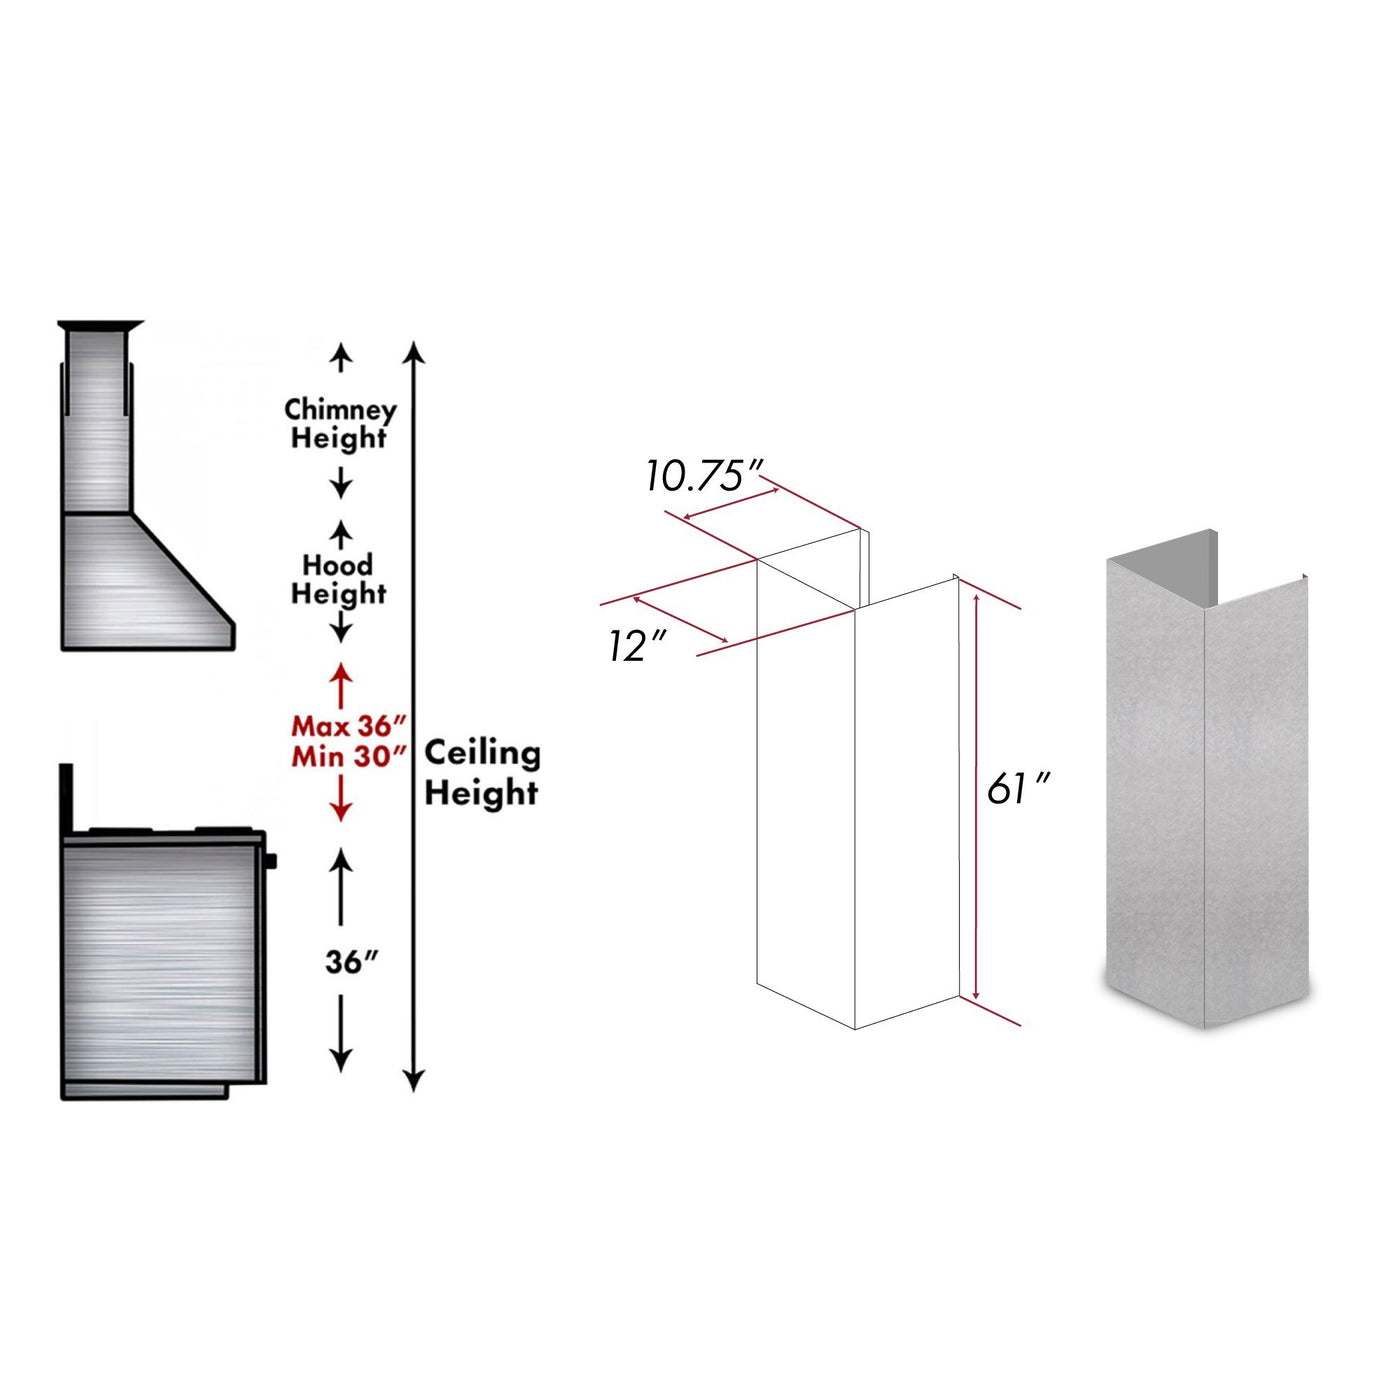 ZLINE Kitchen and Bath, ZLINE 61" DuraSnow® Stainless Steel Chimney Extension for Ceilings up to 12.5 ft. (8KL3iS-E), 8KL3iS-E,